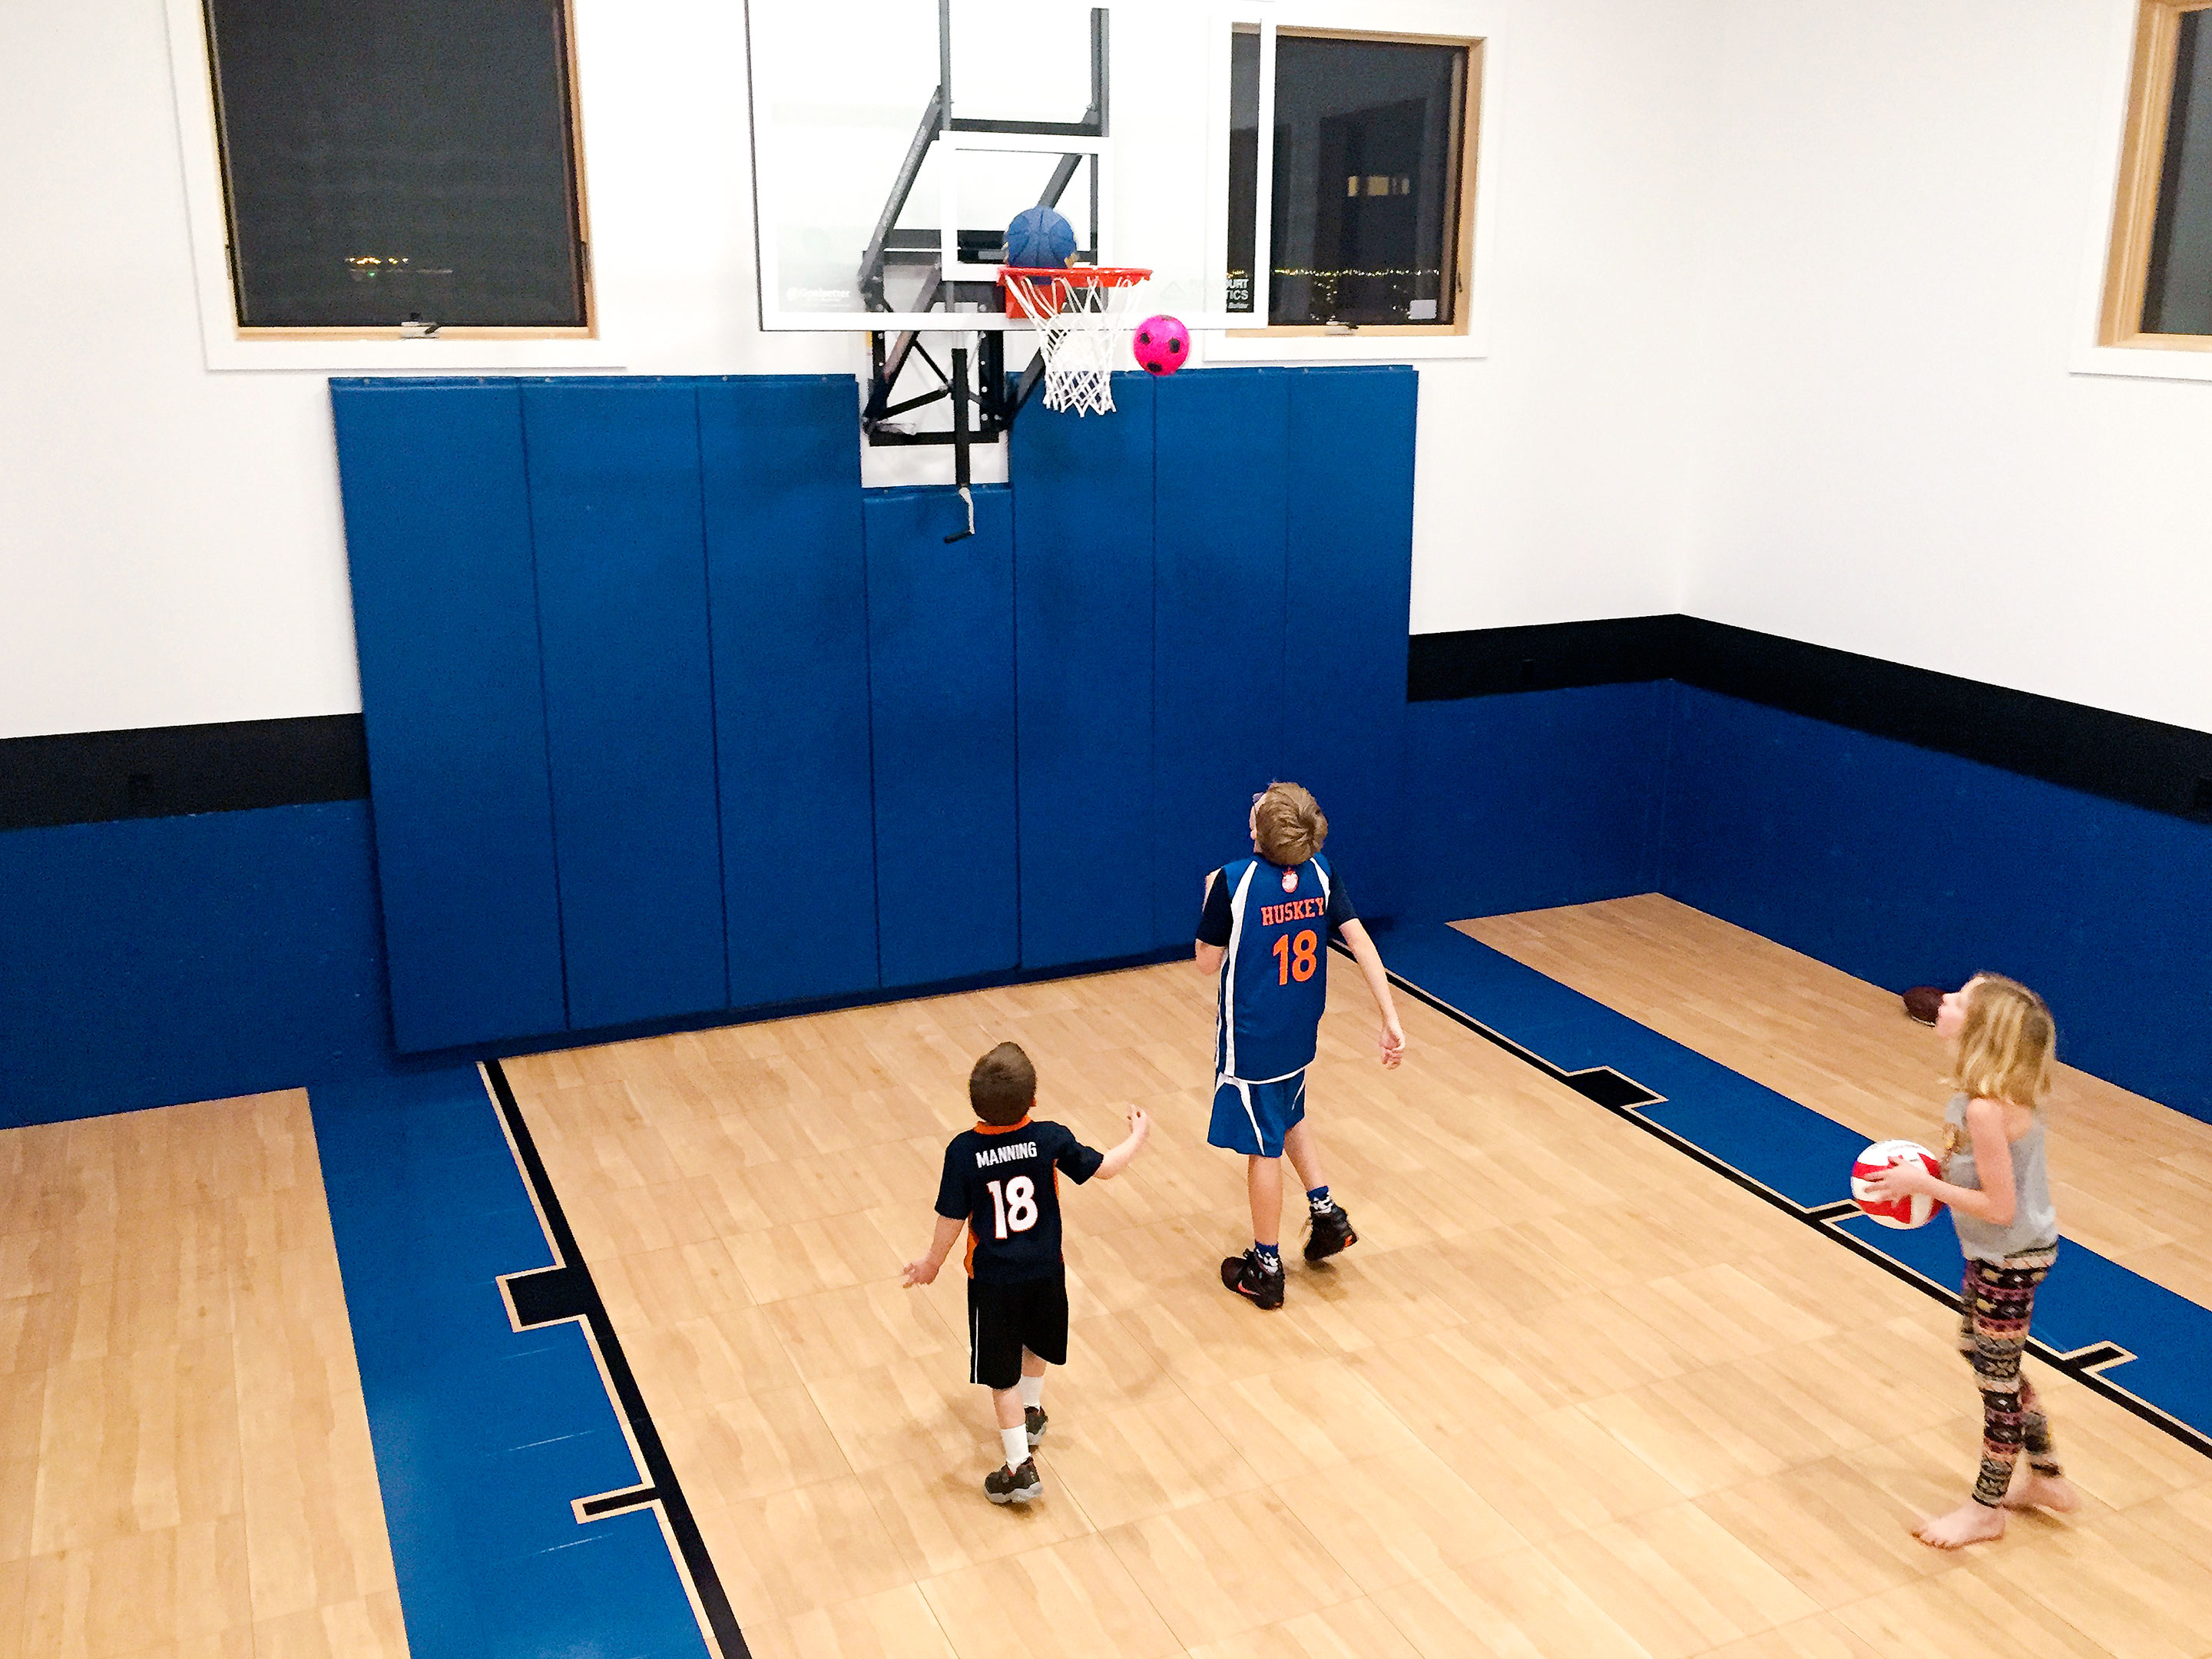 Play ball
                        
                        $5,000+
                        
                        Forget the driveway. You can practice indoors all winter like an NBA star. To be sure, a full 94-by-50-foot indoor court can run upwards of $50,000, and that’s assuming you have the space. But those are the exceptions not the rule for private homes, according to SnapSports, an athletic flooring company based in Salt Lake City, which installs about 1,000 play spaces a year. A 30-by-30-foot practice area with synthetic flooring, painted key and foul lines, and a hoop costs as little as $5,000, or about $5.50 per square foot. Bumping up your budget to $10,000 gets you a 30-by-50-foot half court with wall pads and a logo. The company says it has installed courts of all sizes in basements, barns, and unused guesthouses. While 16-foot-high ceilings are ideal, salesman Jimmy Wood says SnapSports has worked with ceilings as low as 10 feet.